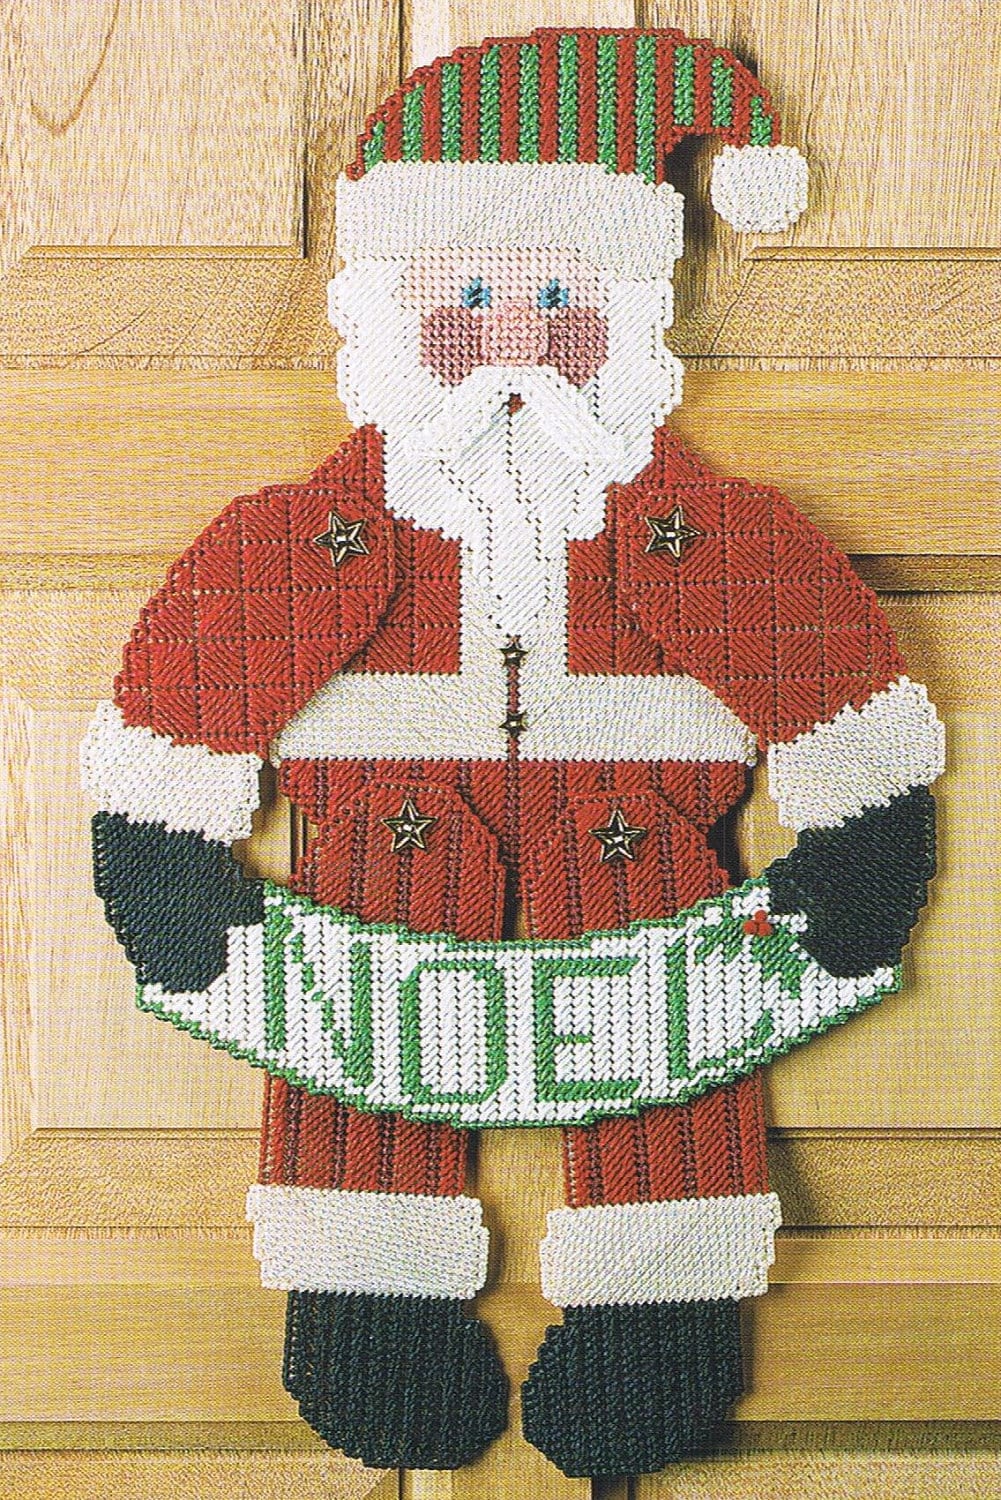 Plastic Canvas Patterns For Christmas Free Patterns